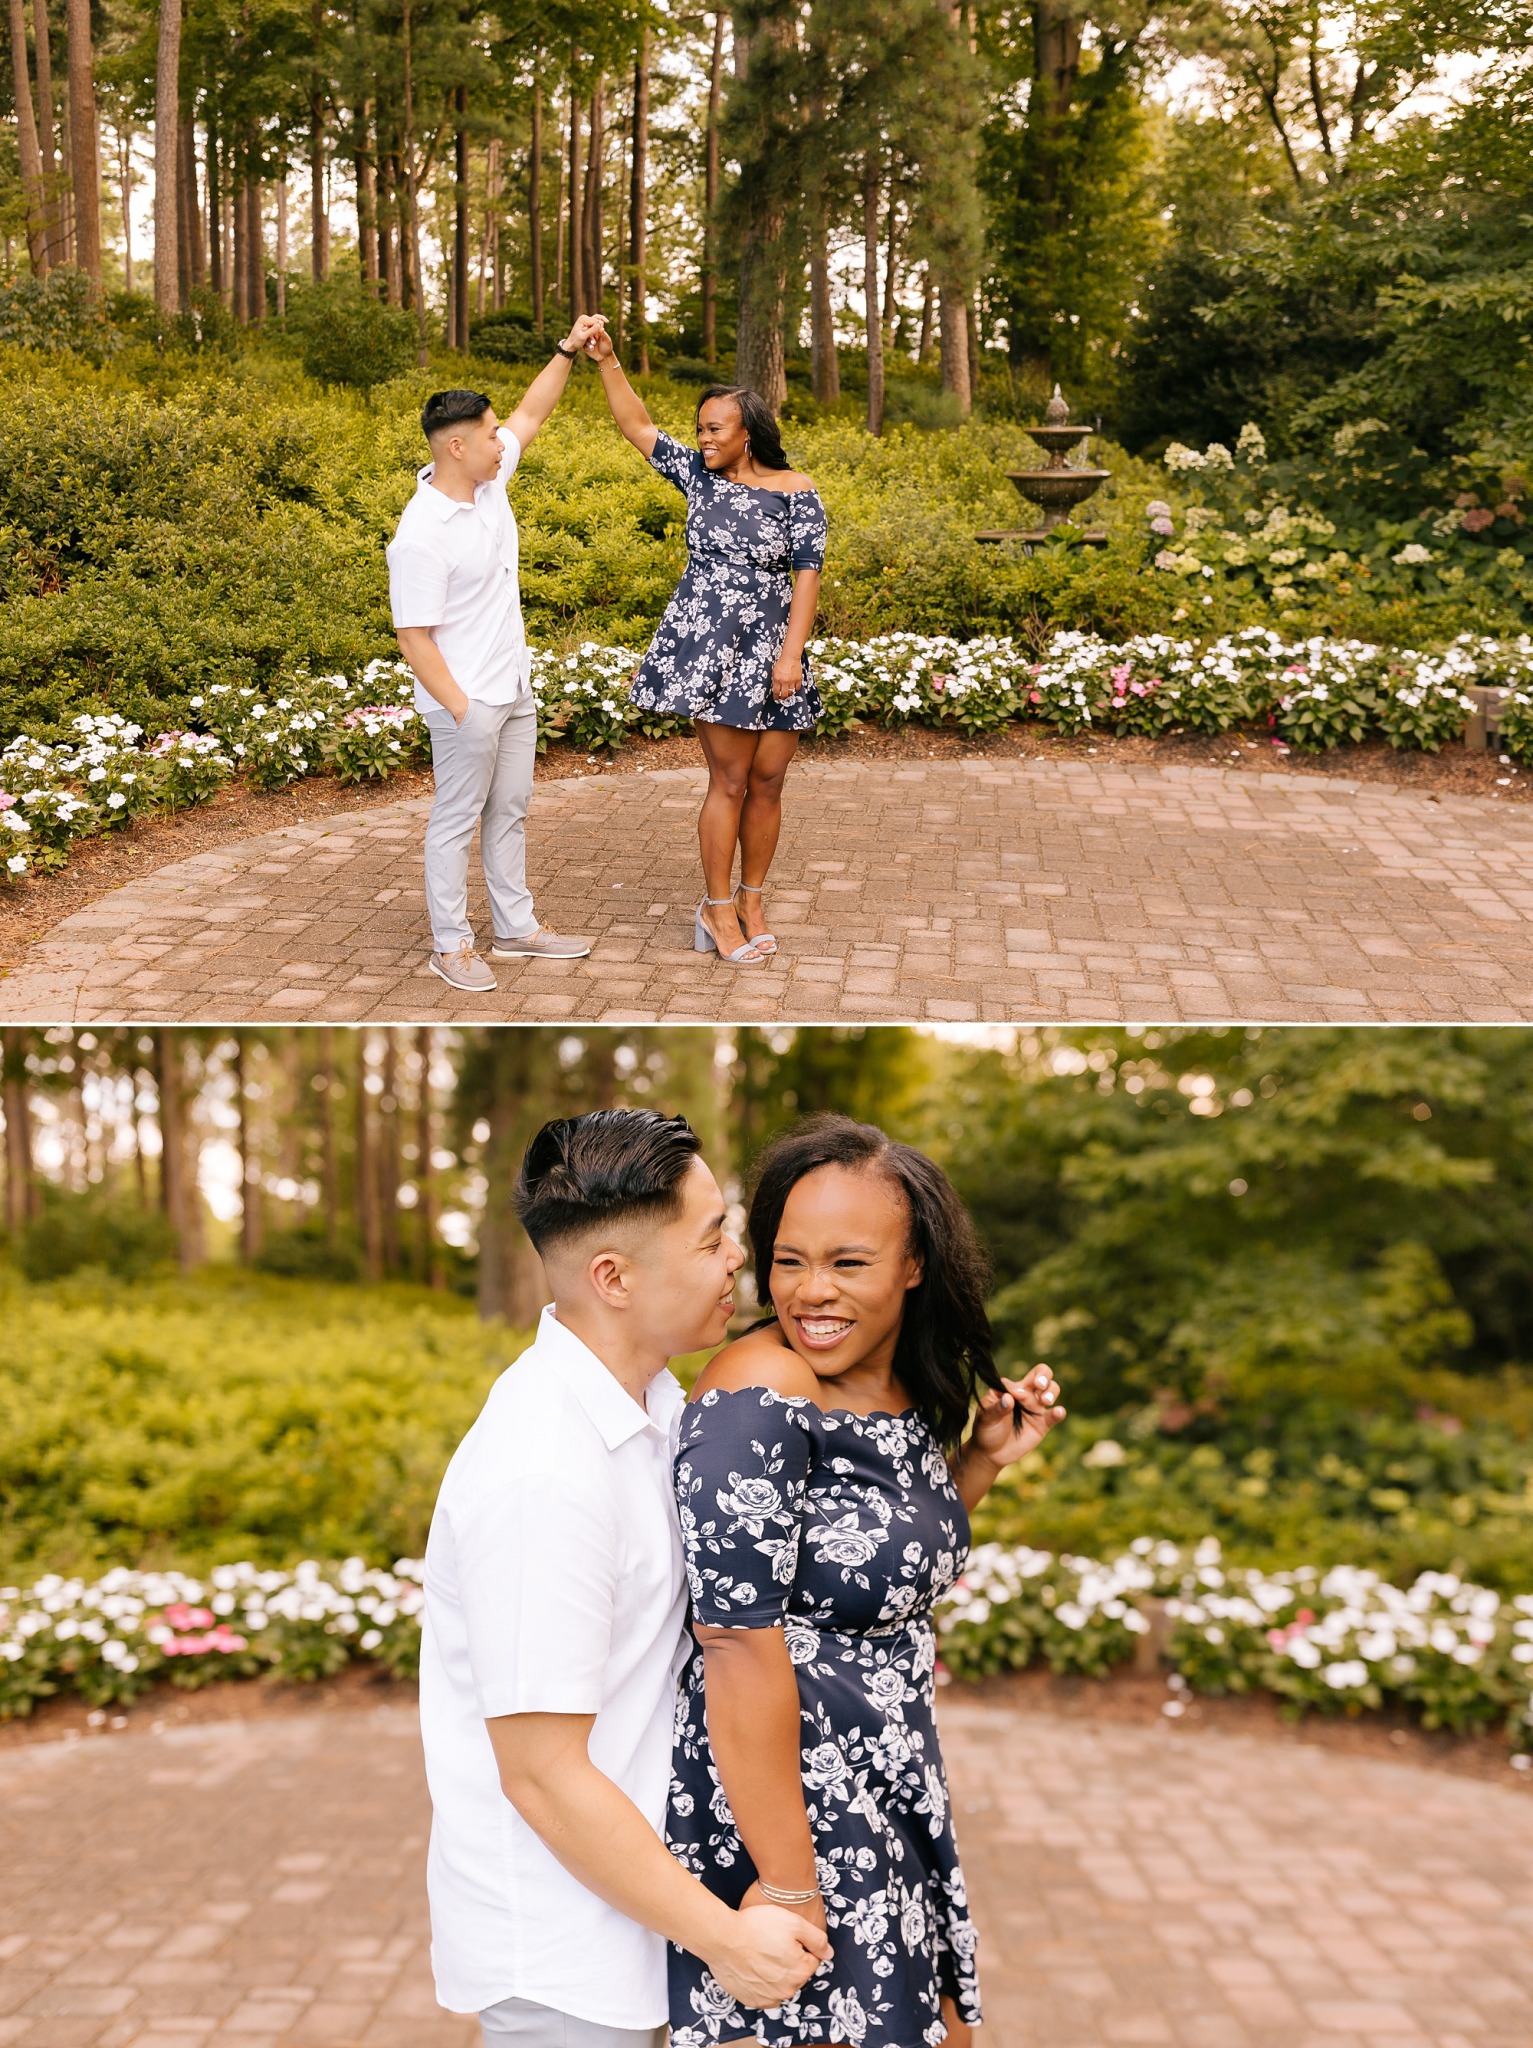 groom dances with bride during engagement photos at WRAL Gardens